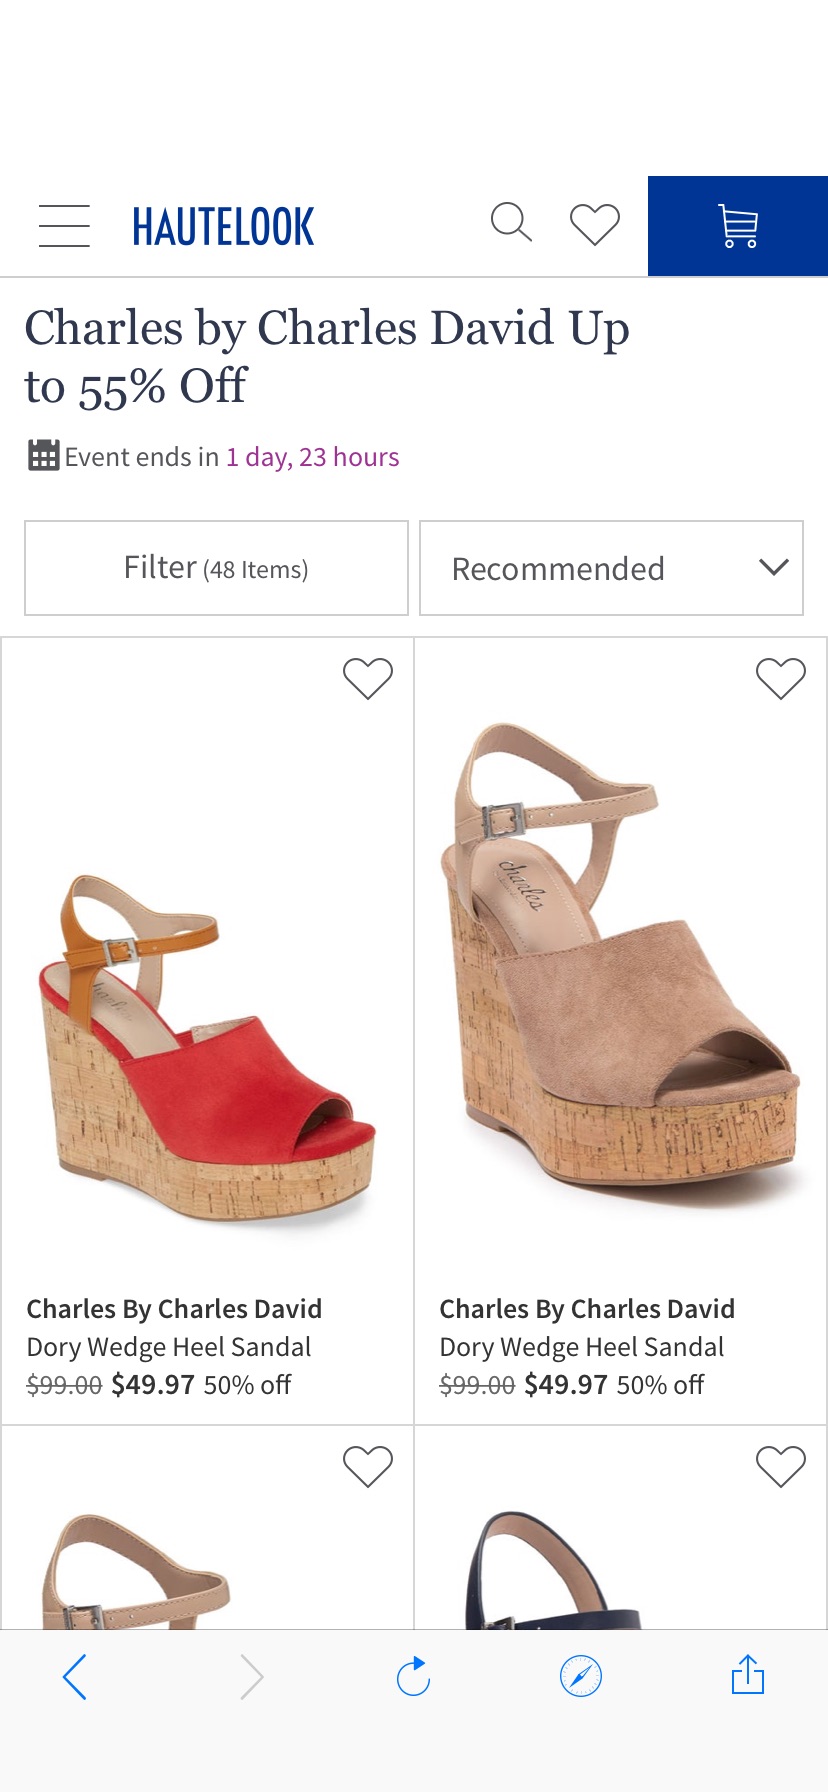 Charles by Charles David Up to 55% Off